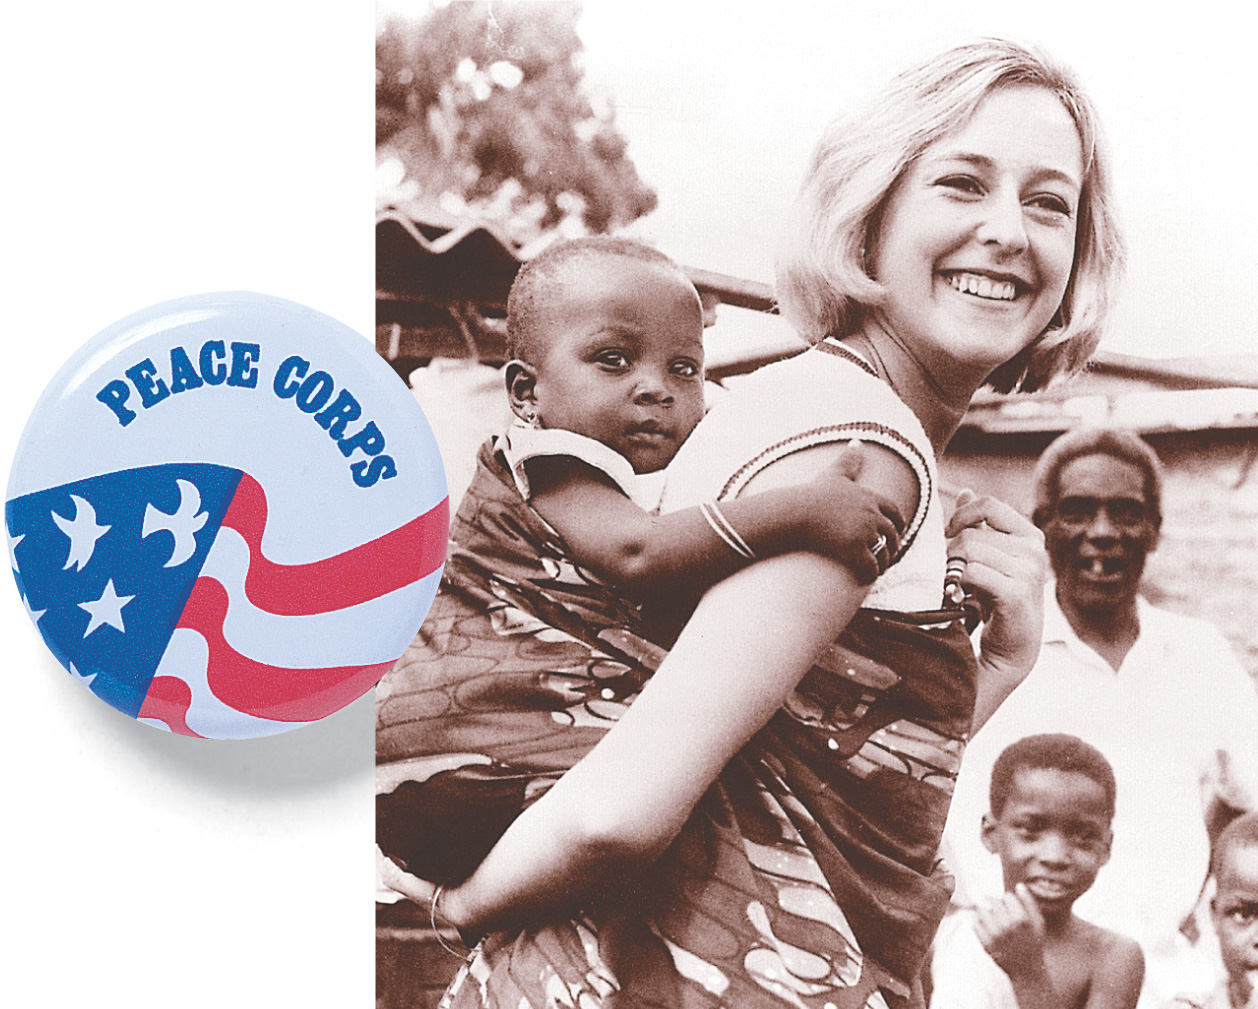 Beside an image of a red, white and blue button labled Peace Corps, a photo shows a smiling youg woman carries a young child on her back.